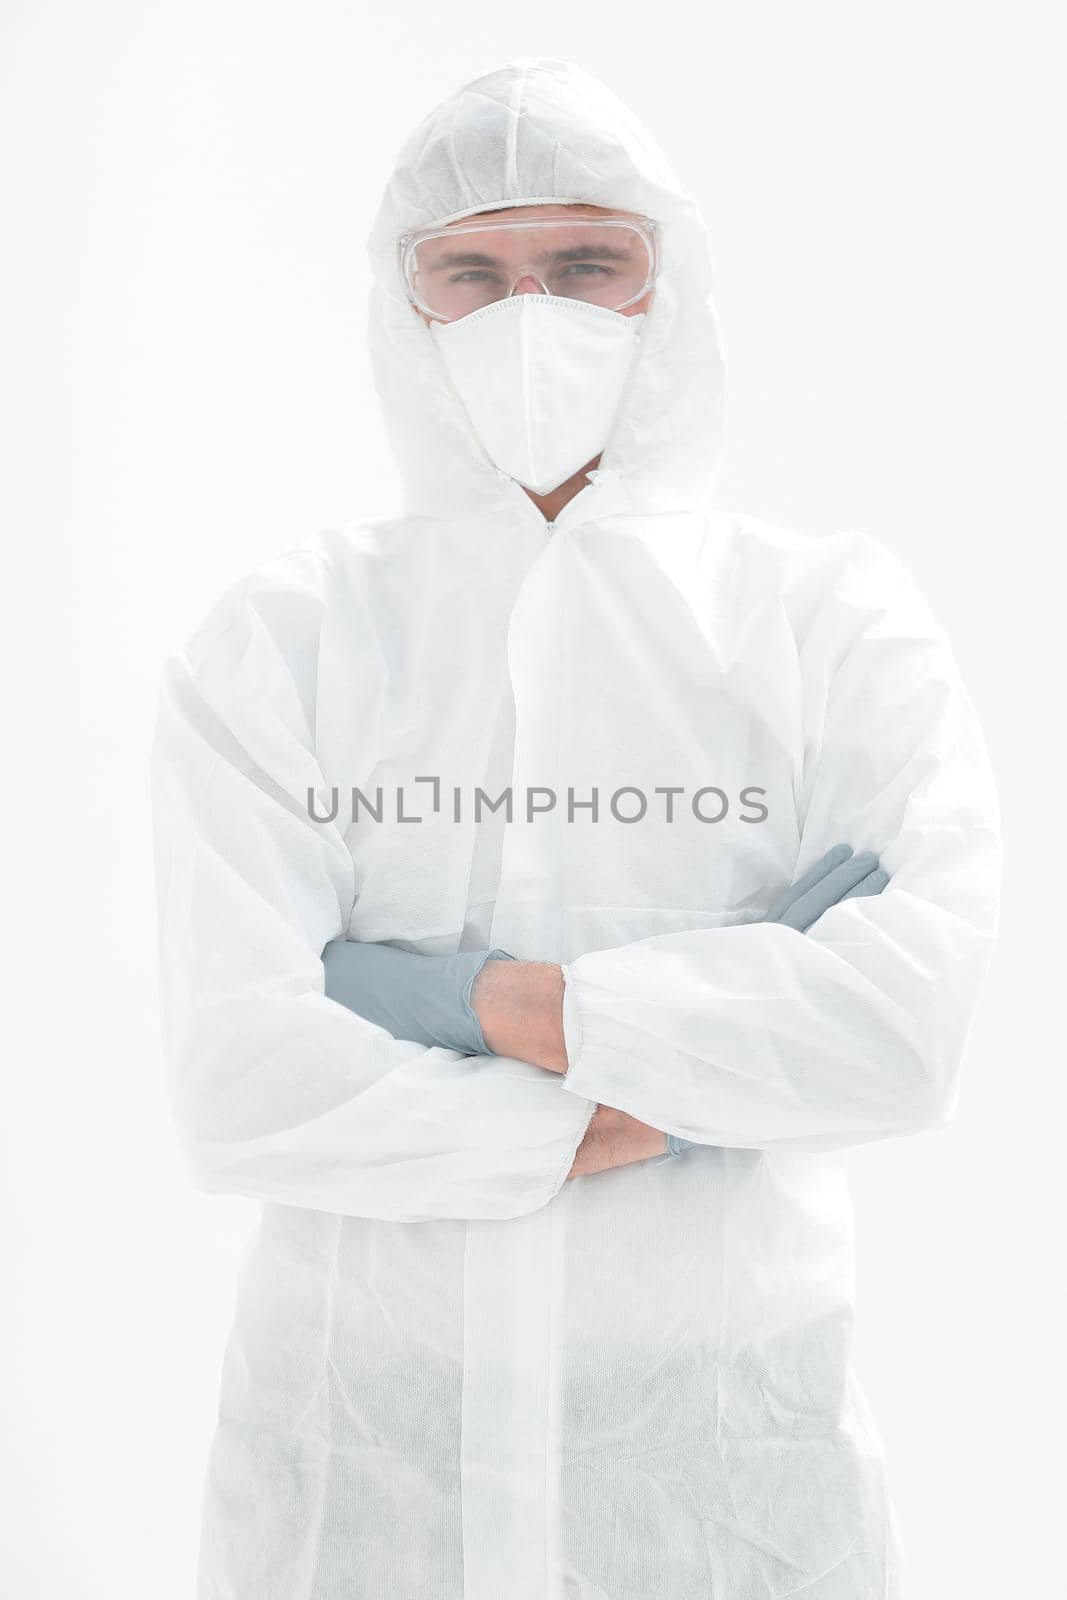 background image of a modern scientist in a protective suit.photo with copy space